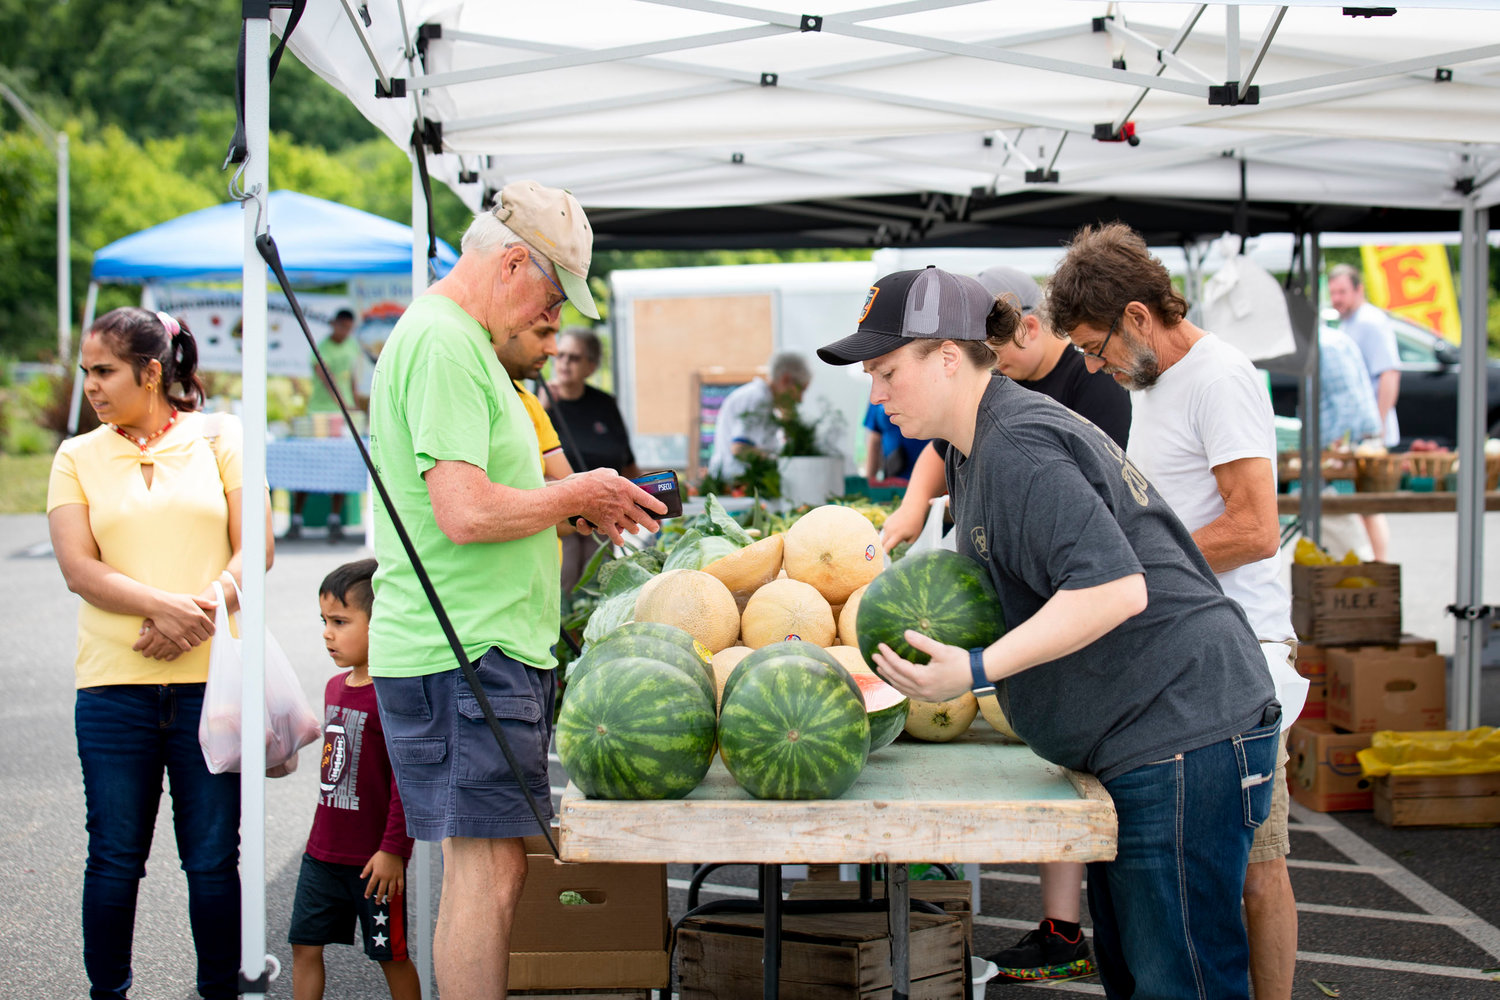 The Wolf Administration reminds seniors and families about the Farmers Market Nutrition Program, which addresses food insecurity and supports Pennsylvania farmers, in Harrisburg, PA on June 21, 2022.